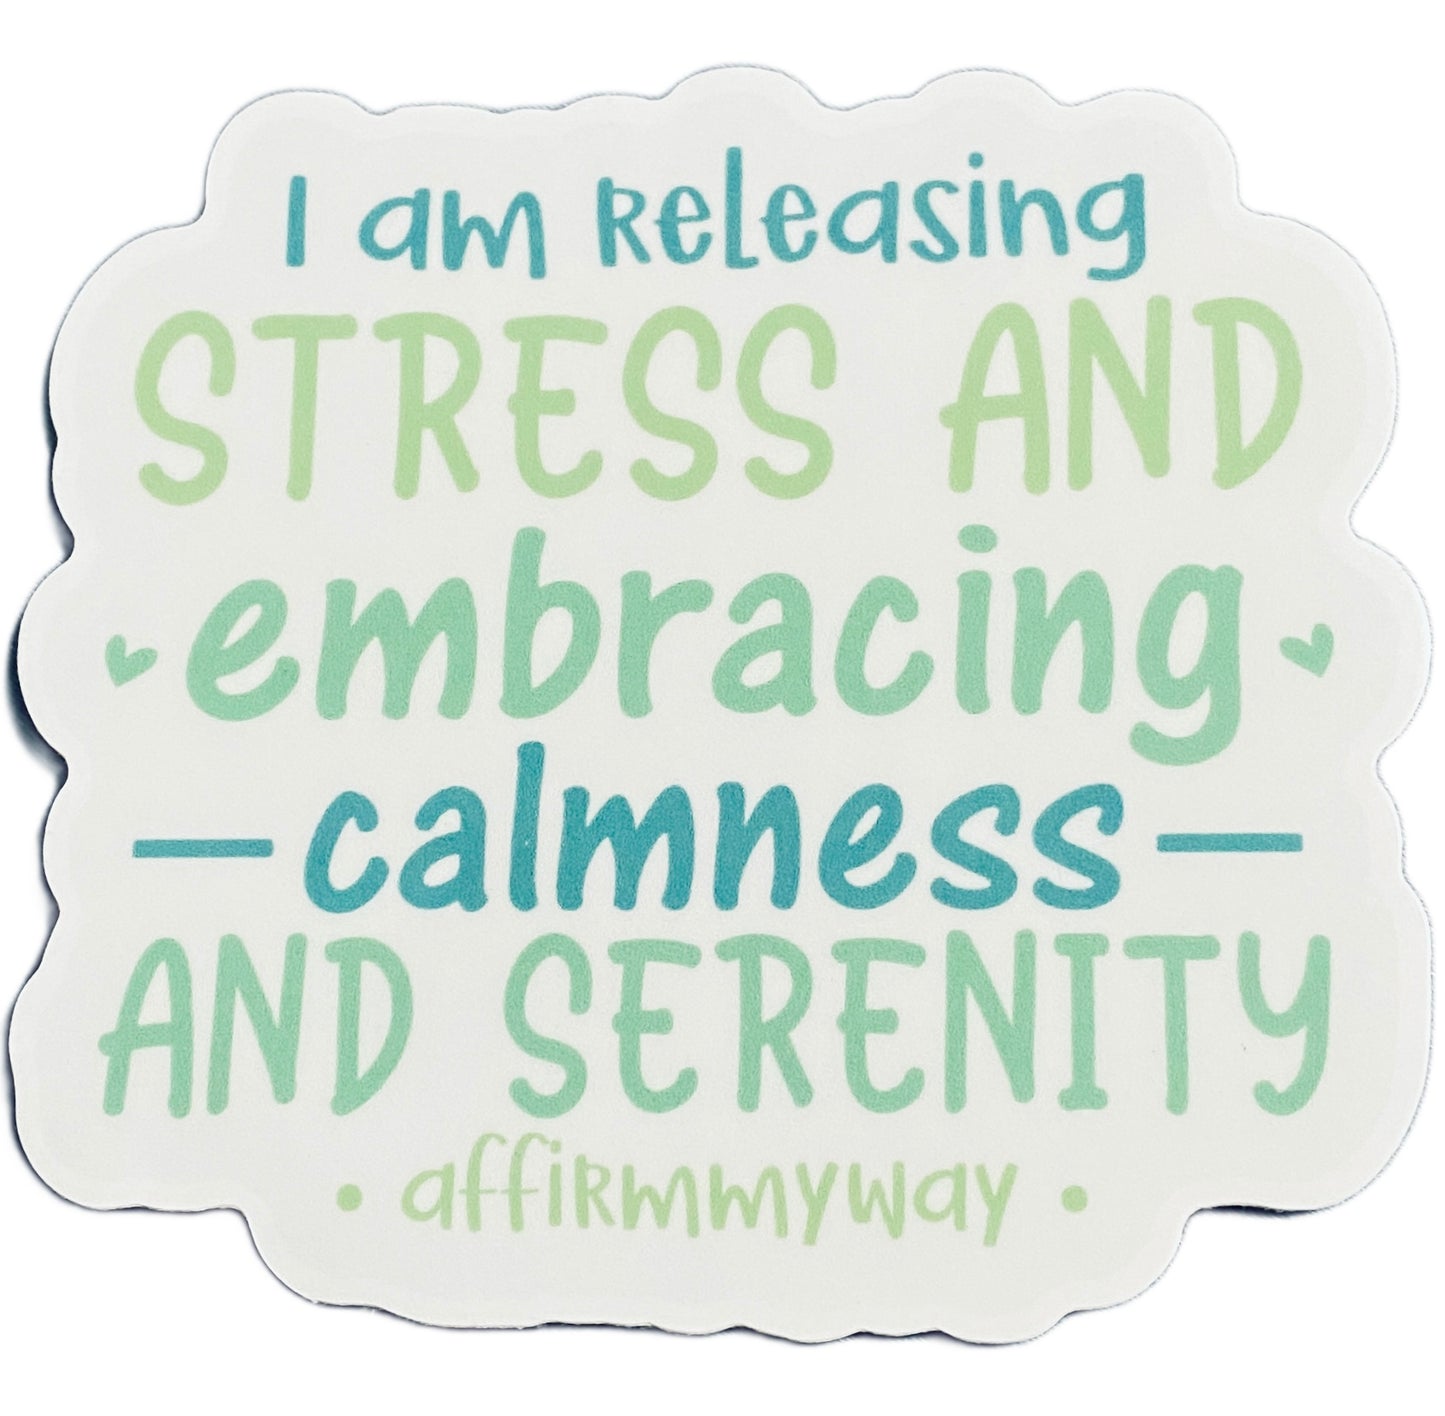 I Am releasing Stress and Embracing Calmness and Serenity - Affirmation Sticker